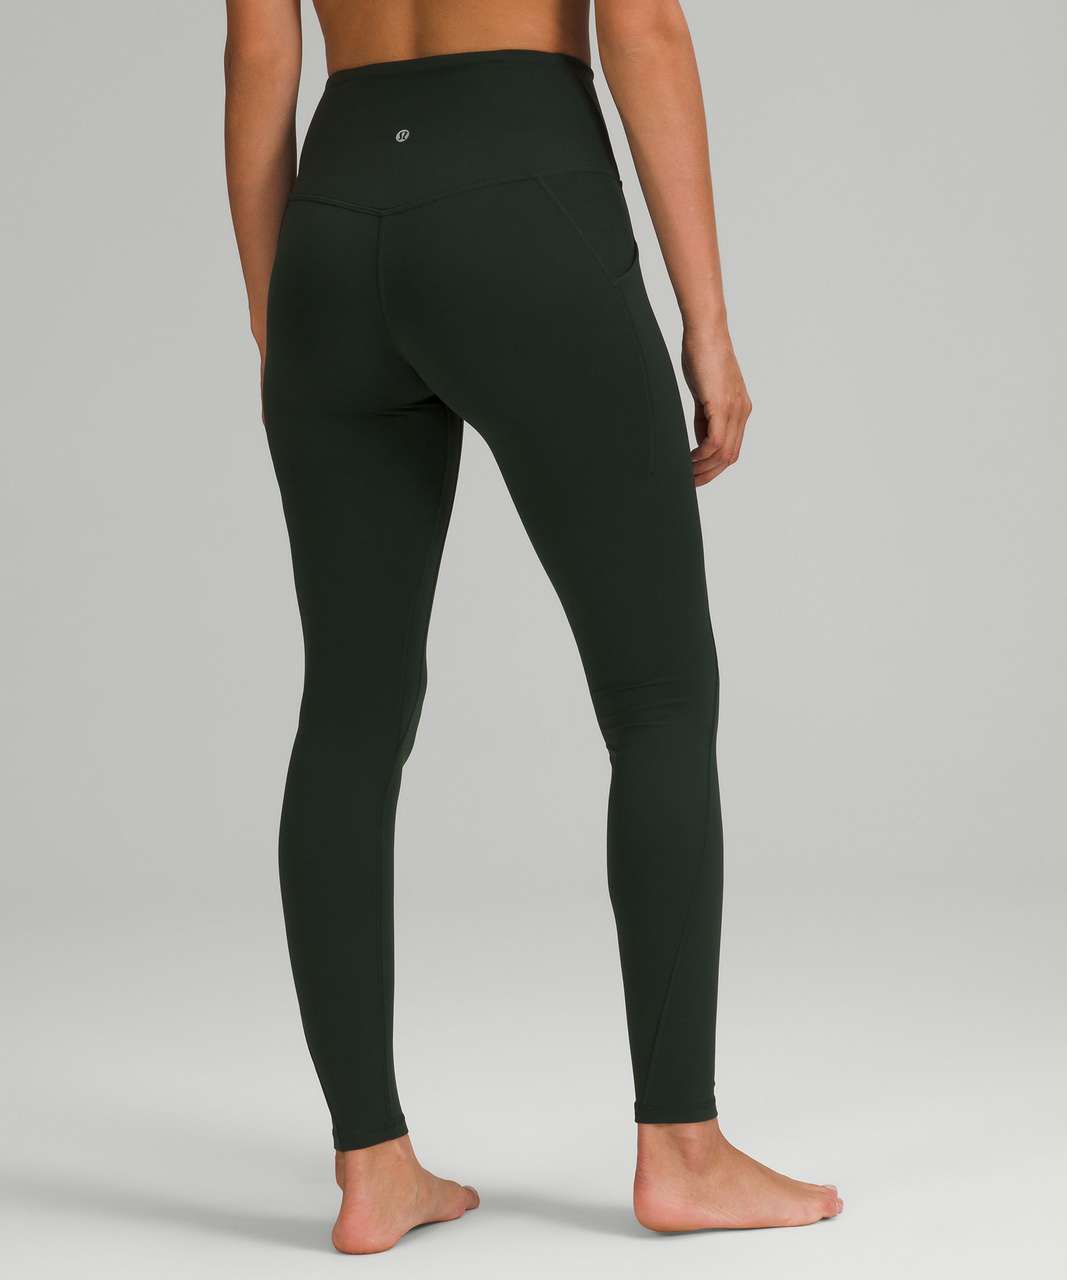 Lululemon Align High-Rise Pant with Pockets 28" - Rainforest Green